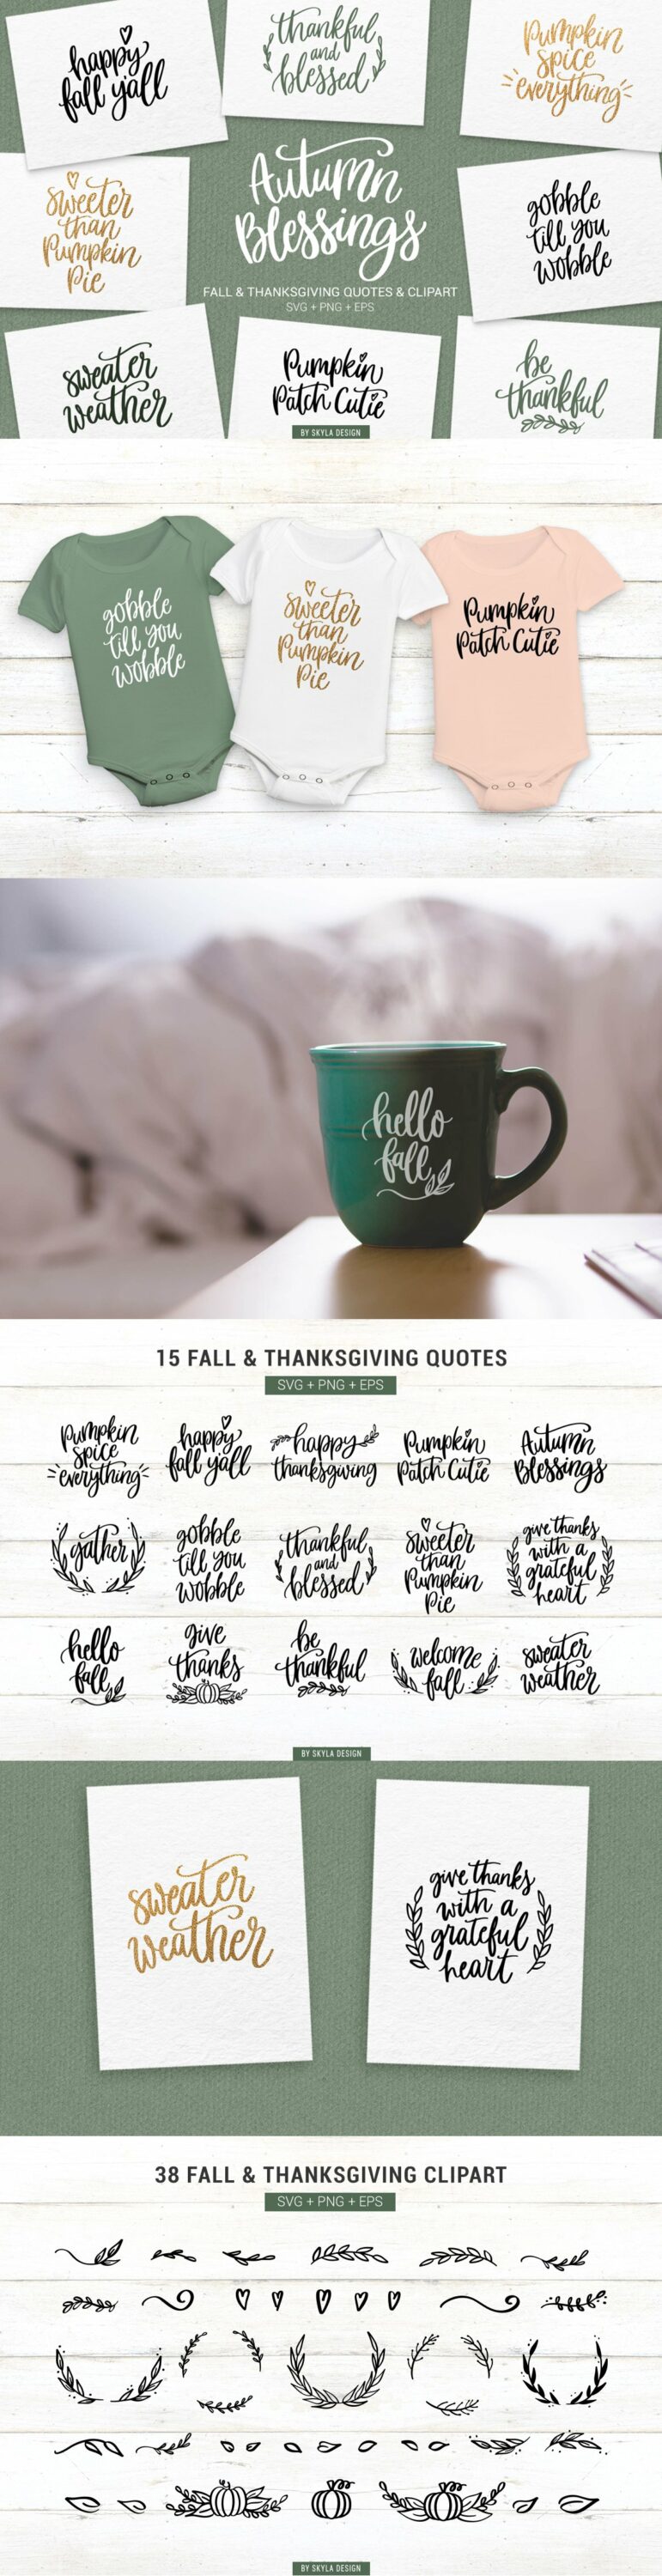 Cool Big autumn collection of some quotes.